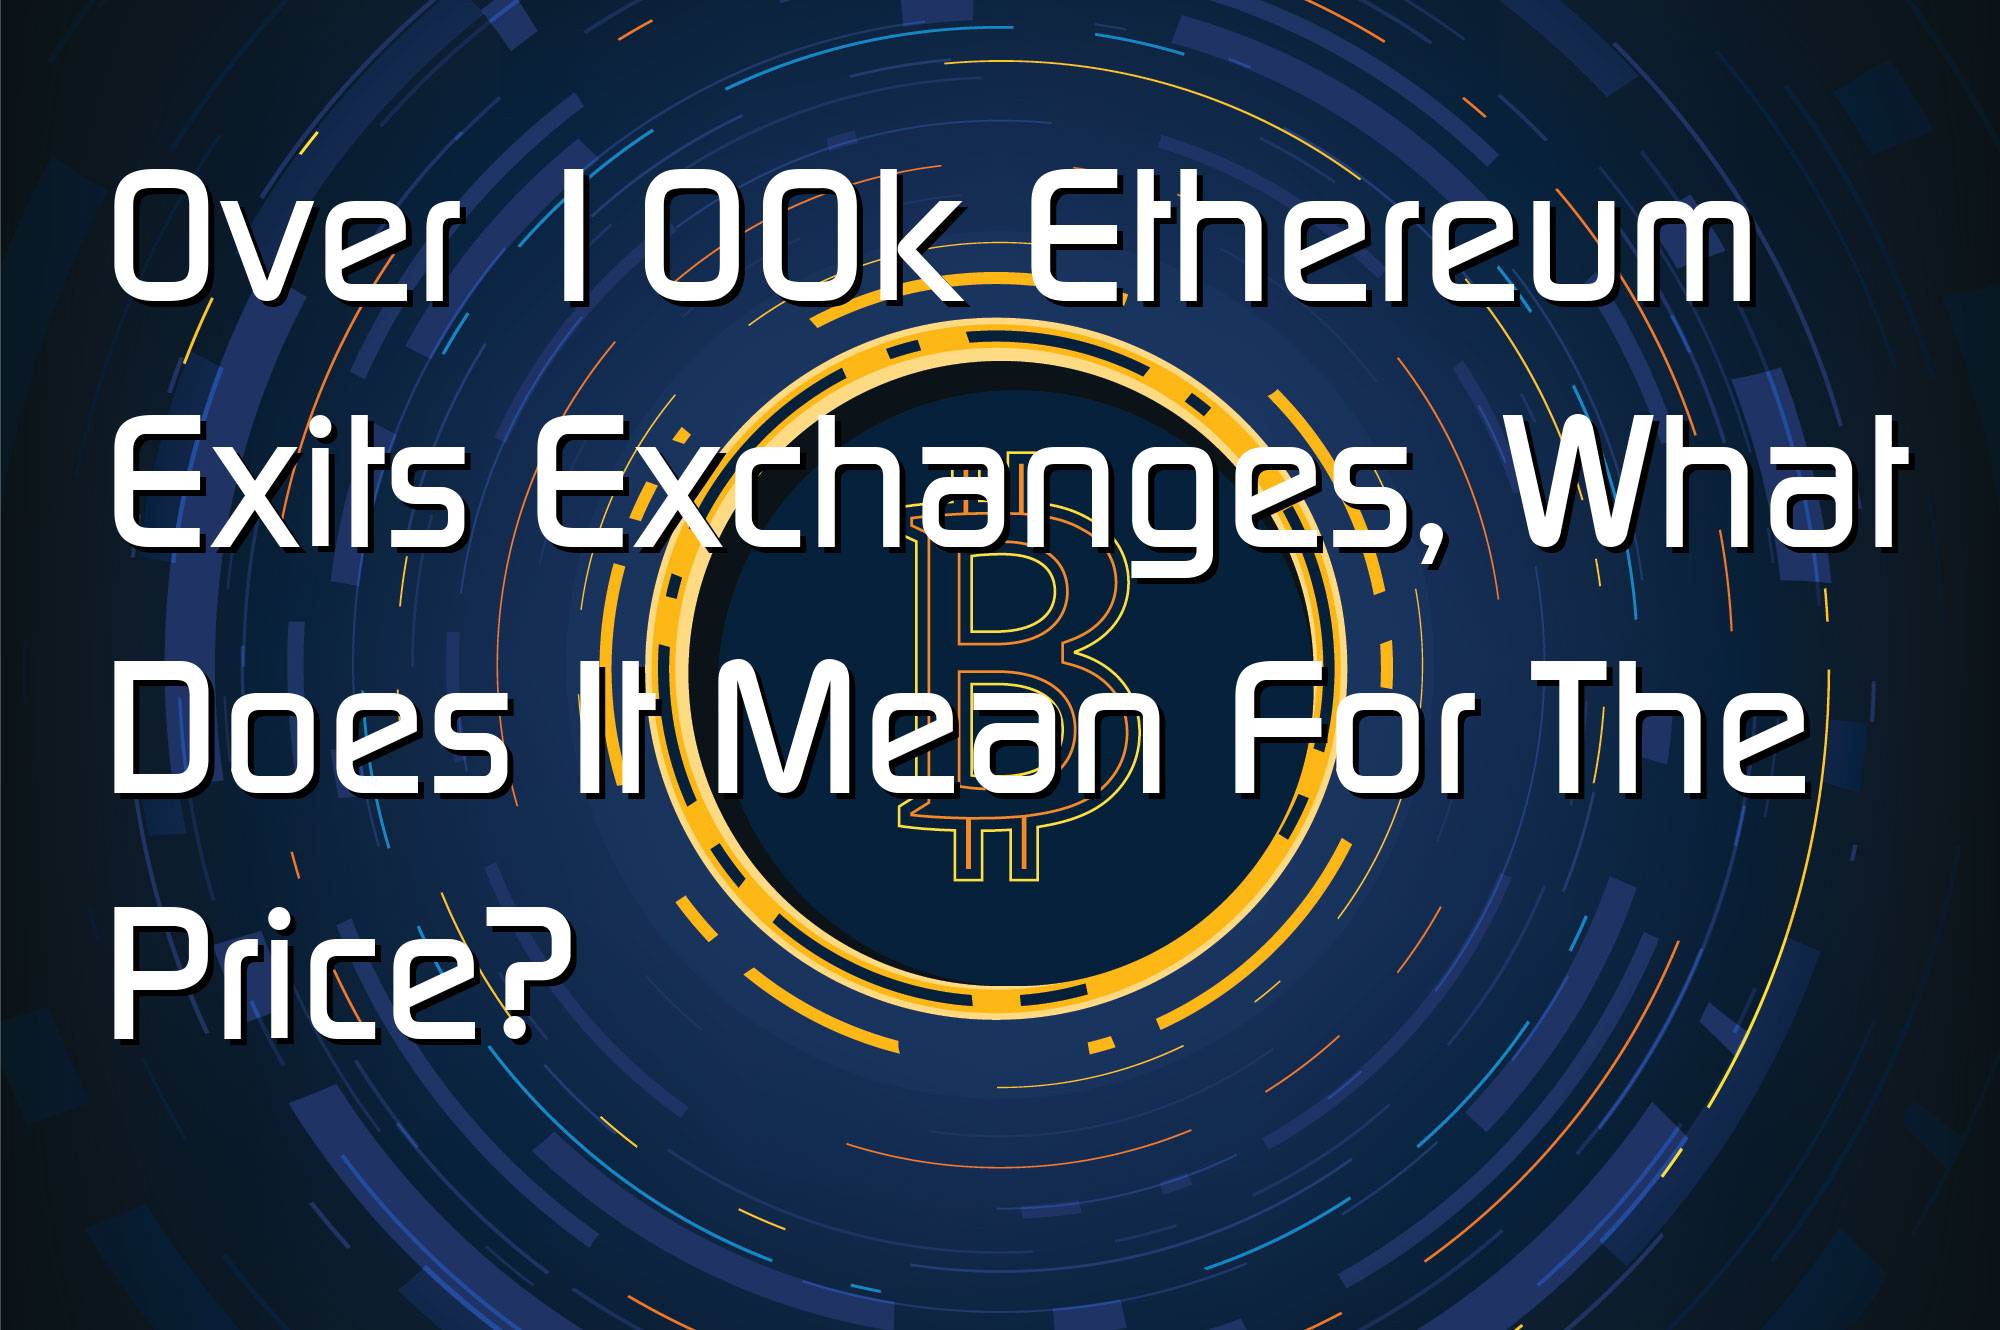 @$61703: Over 100k Ethereum Exits Exchanges, What Does It Mean For The Price?